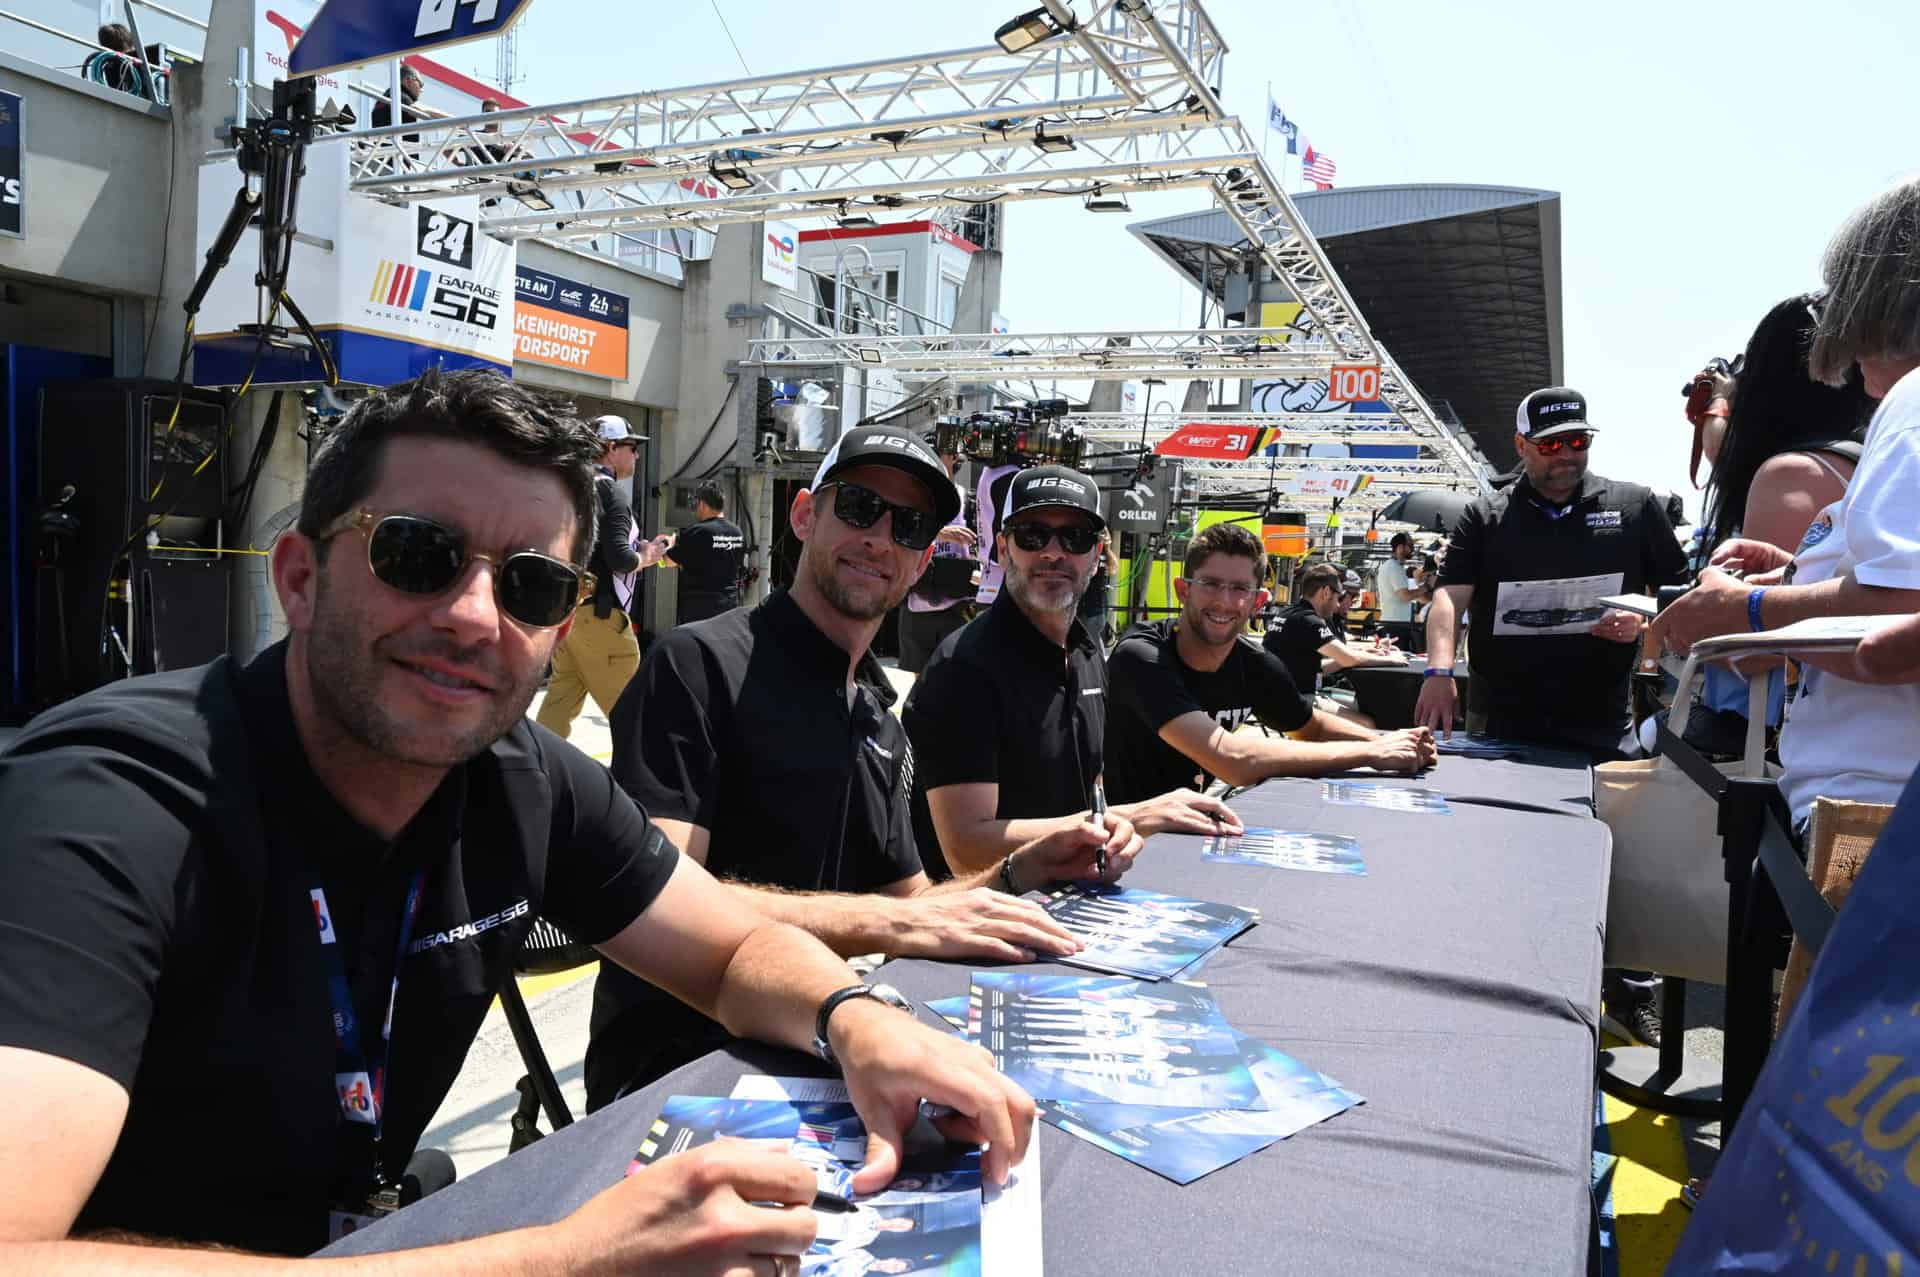 Mike Rockenfeller, Jensen Button, Jimmie Johnson and Jordan Taylor were a big hit at the 24 Hours of Le Mans autograph session. Photo by Jerry Jordan/Kickin' the Tires